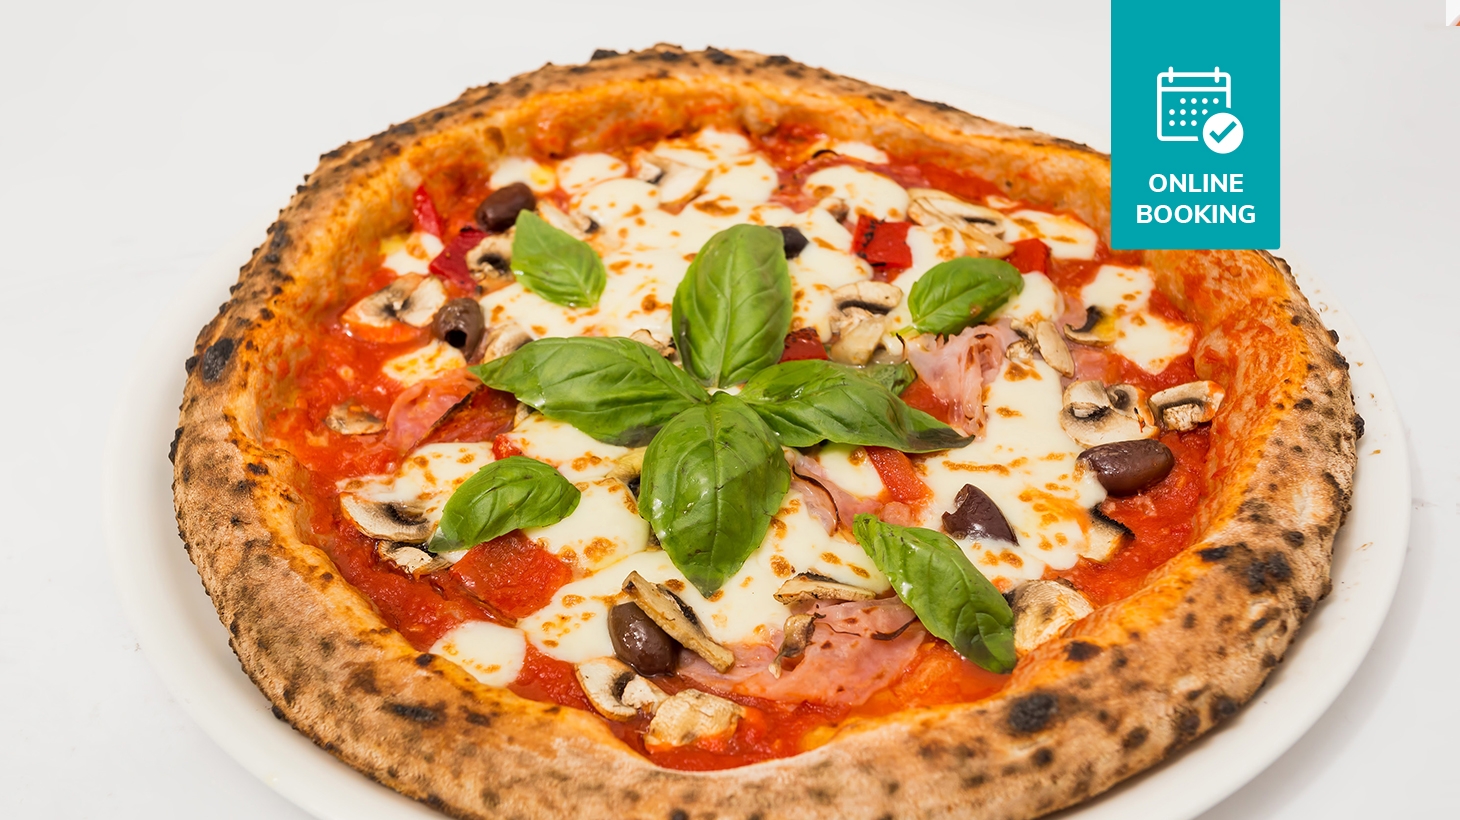 Save up to $94 on an Authentic Italian Three-Course Dinner with Drinks